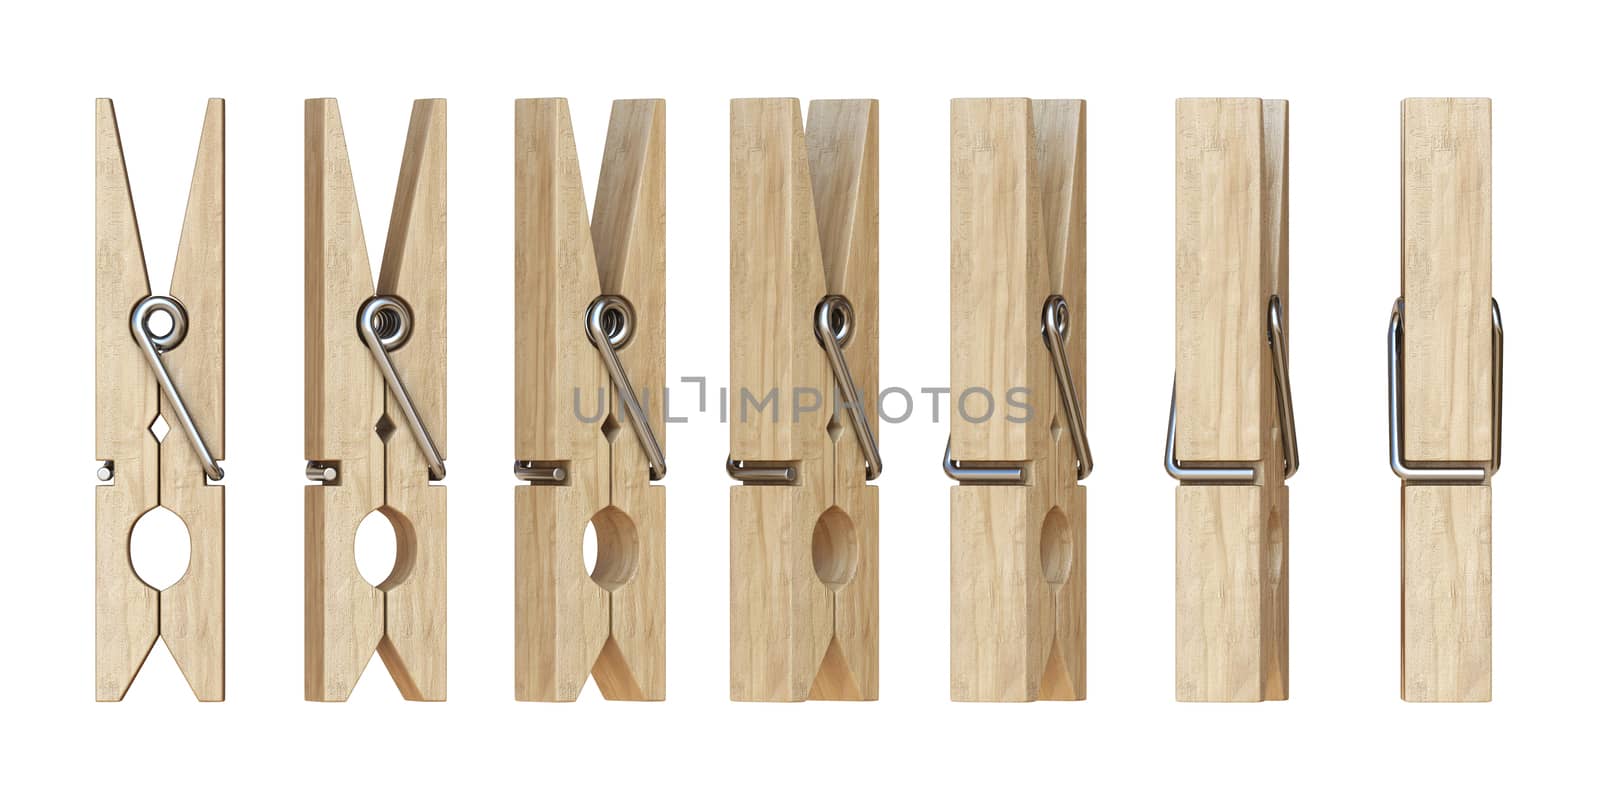 Wooden clothespins 3D by djmilic